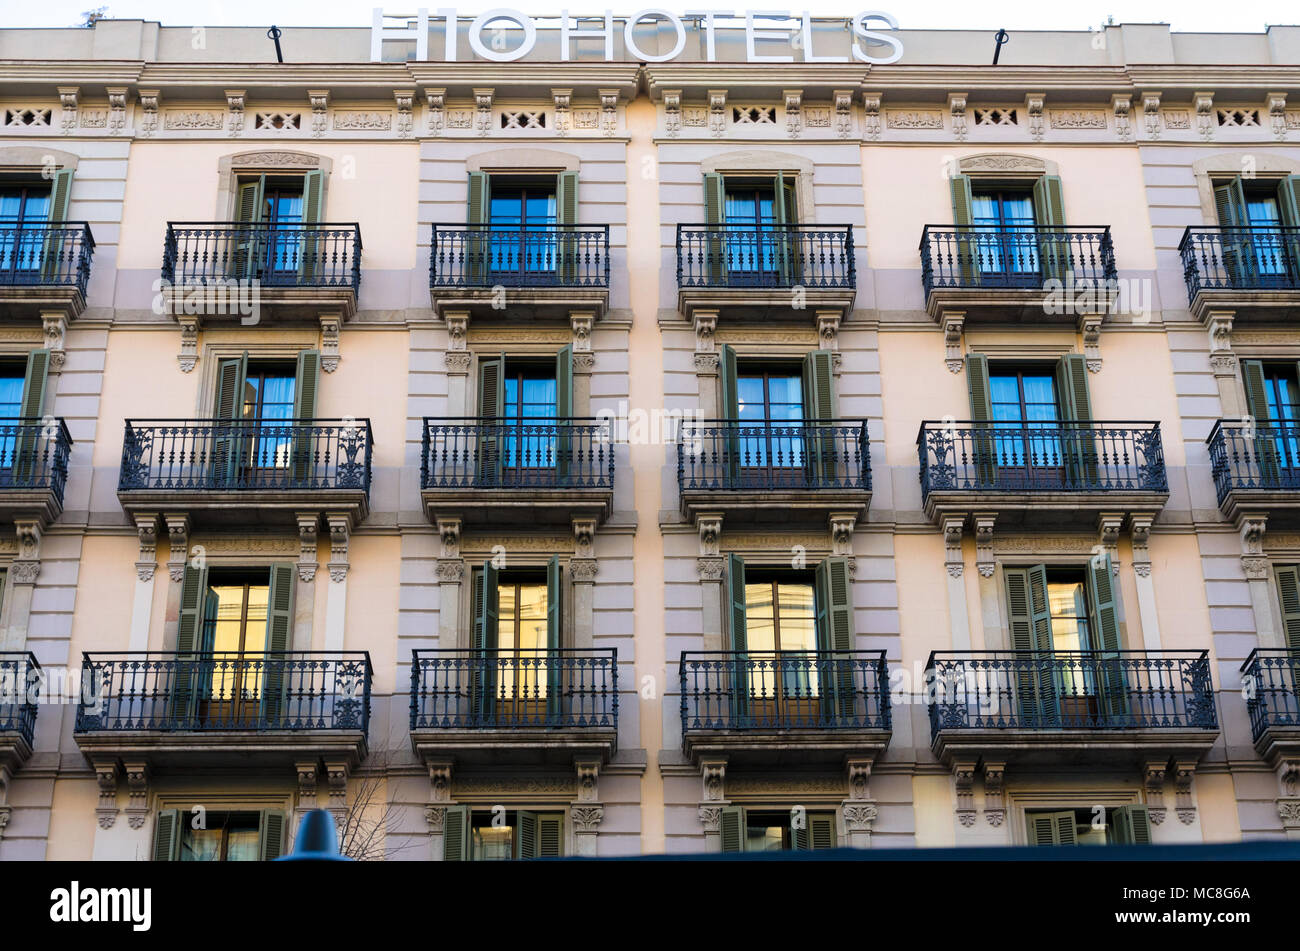 Balconies and windows at a hotel in Barcelona, Spain. Stock Photo